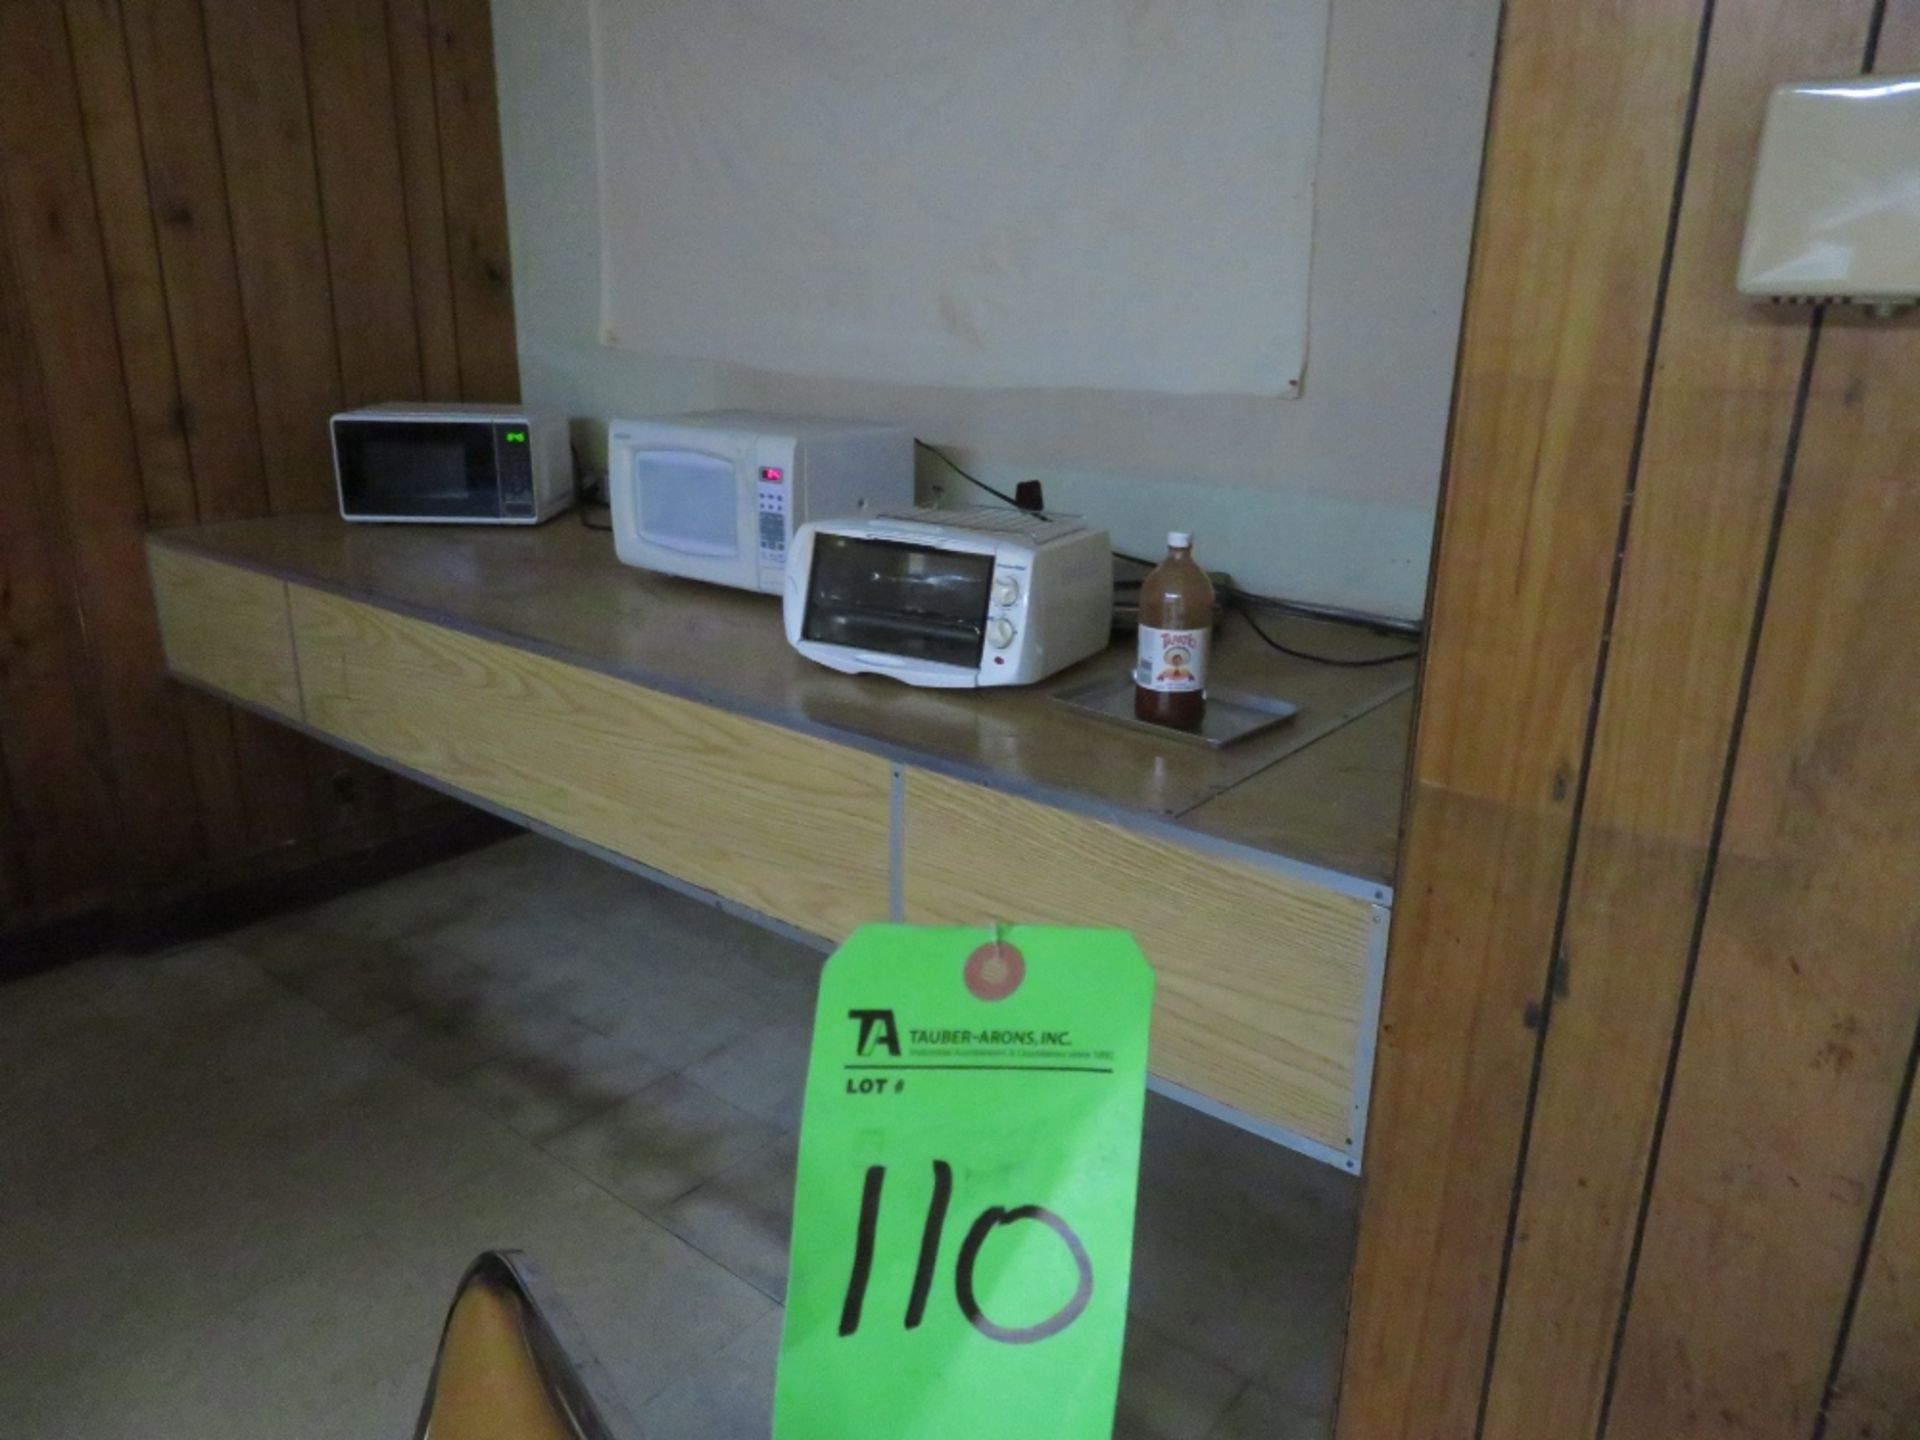 (Lot) Contents of Room, Including: Microwaves